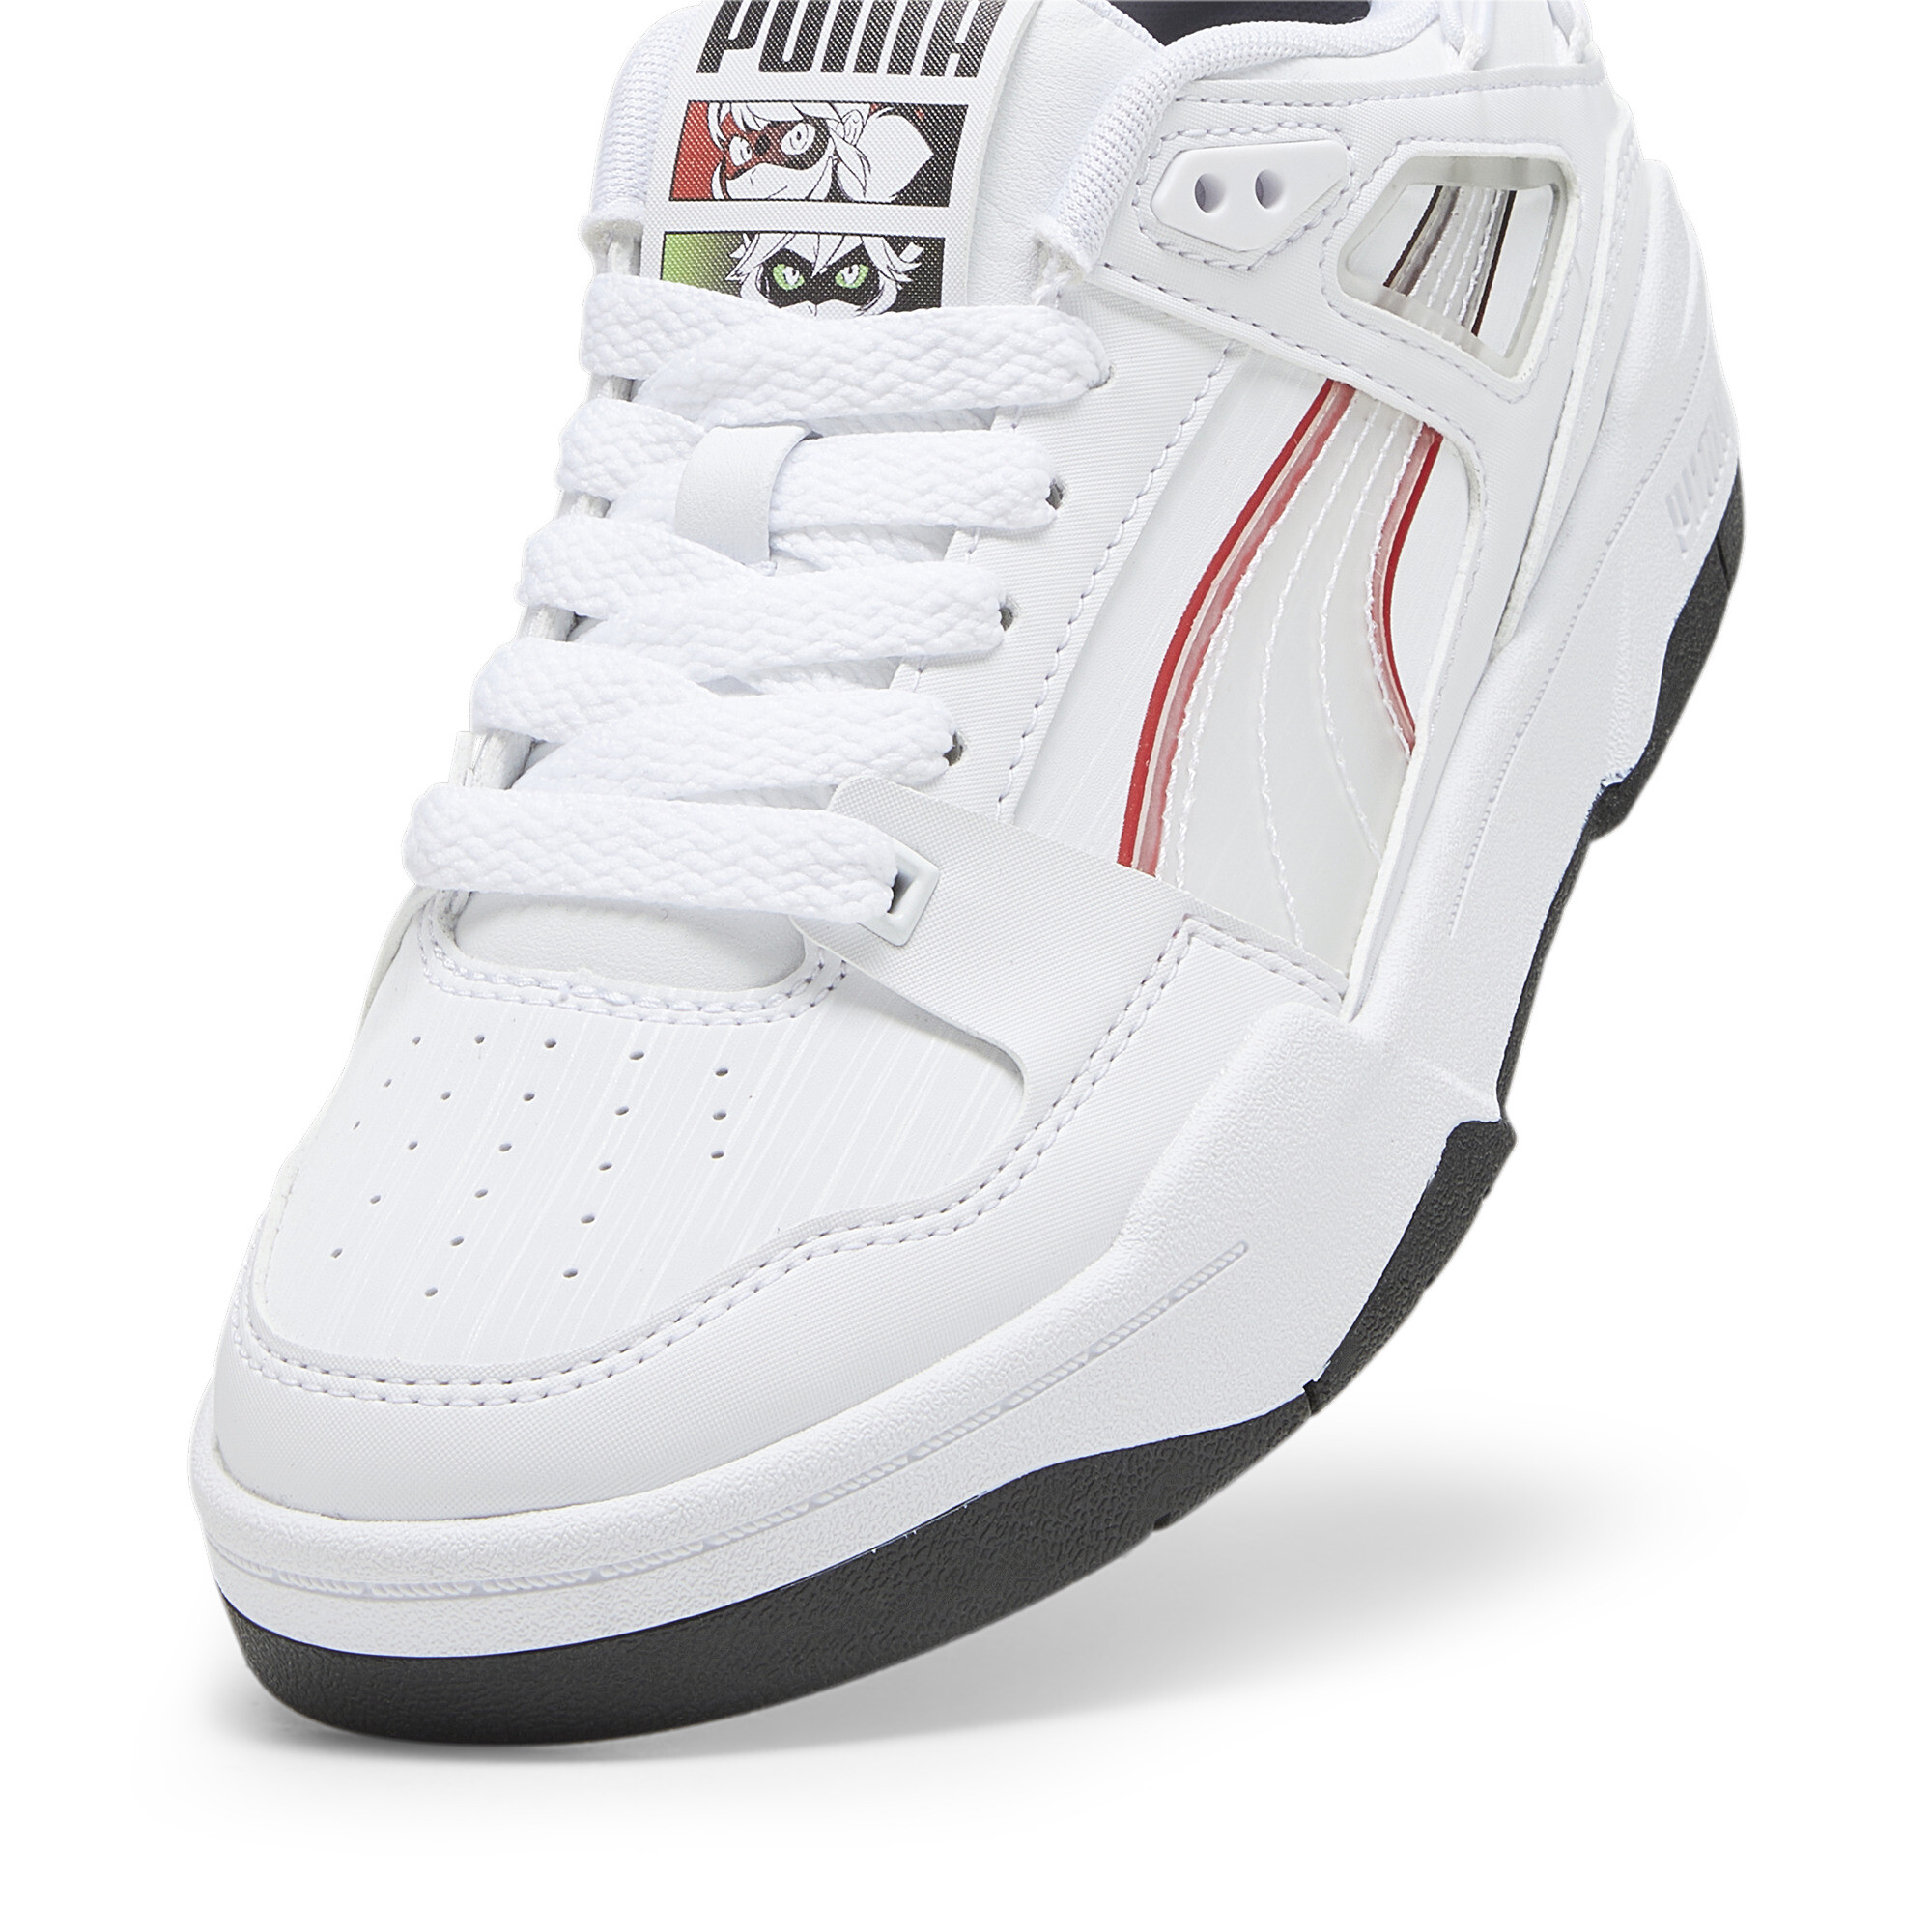 PUMA X MIRACULOUS Slipstream Youth Sneakers In White, Size EU 35.5